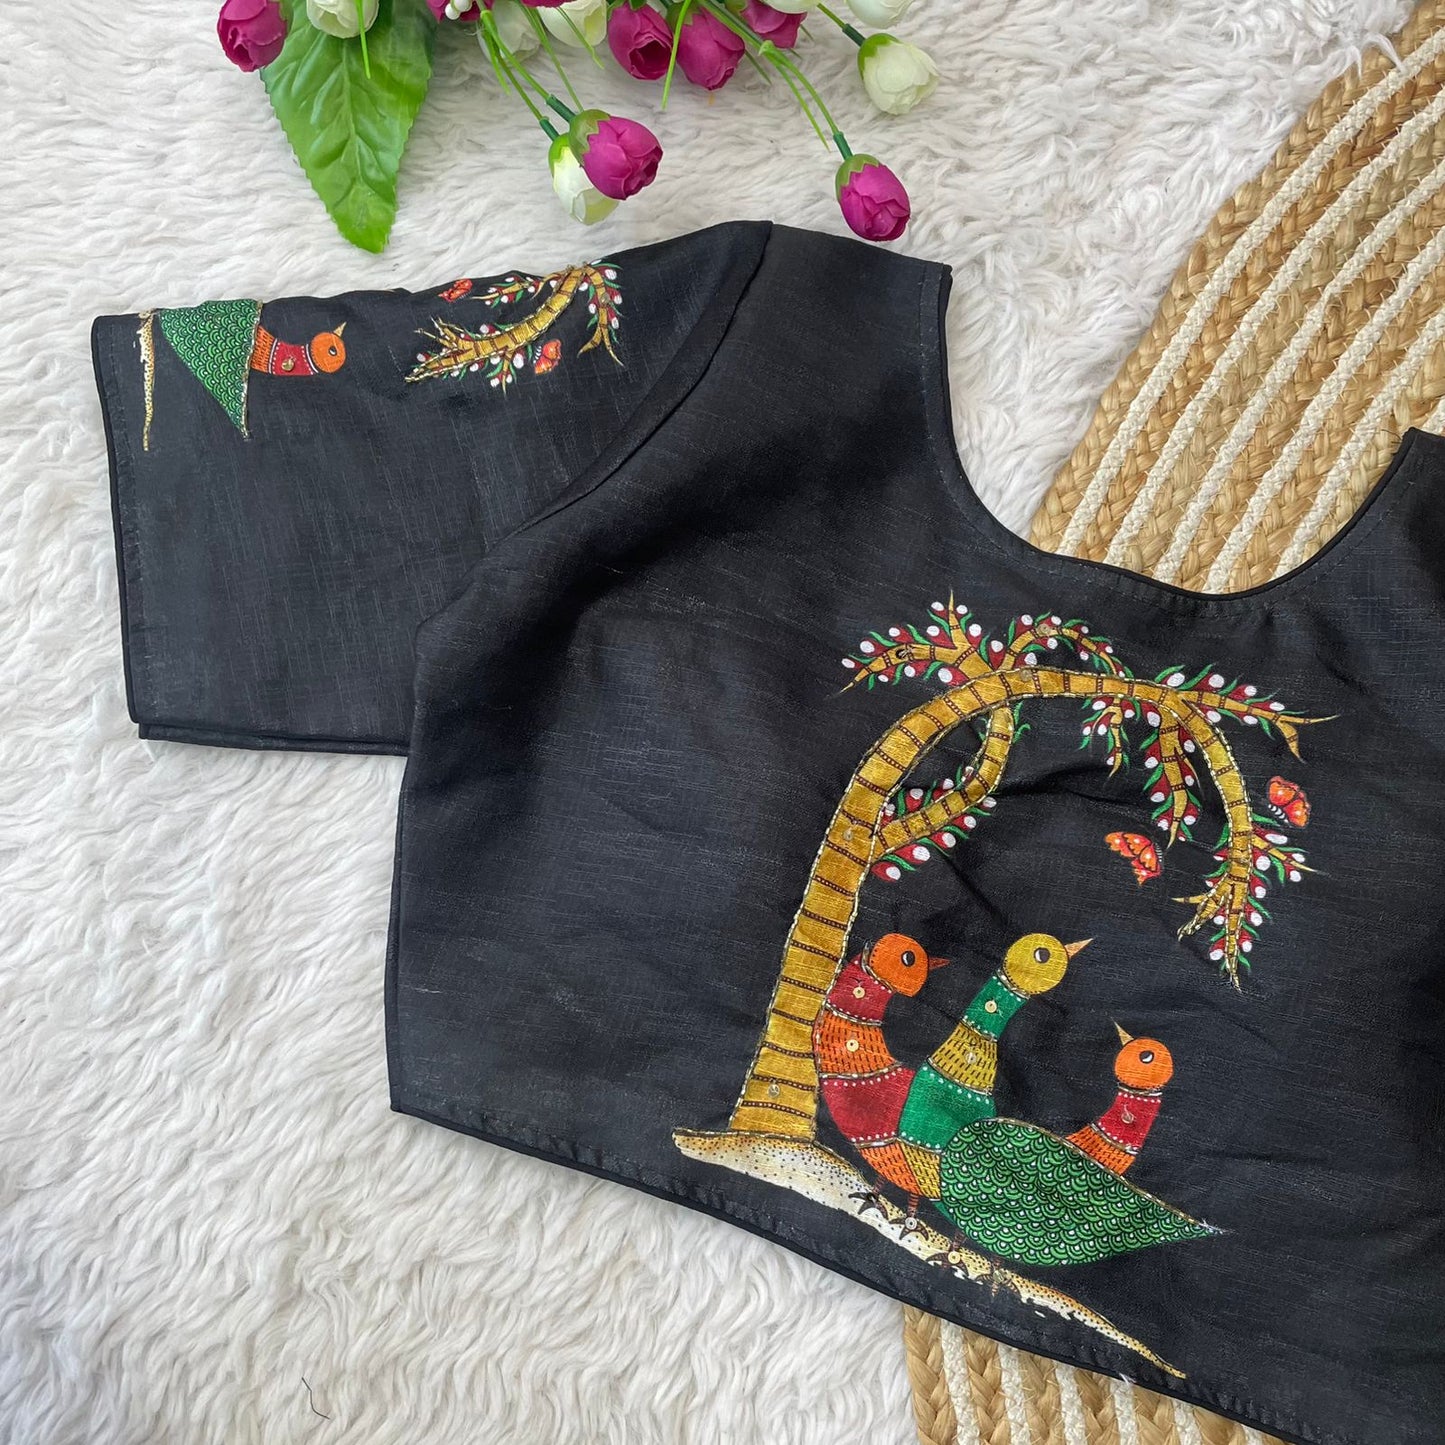 Sierra The Label Silk Heavy Embroidery Blouse